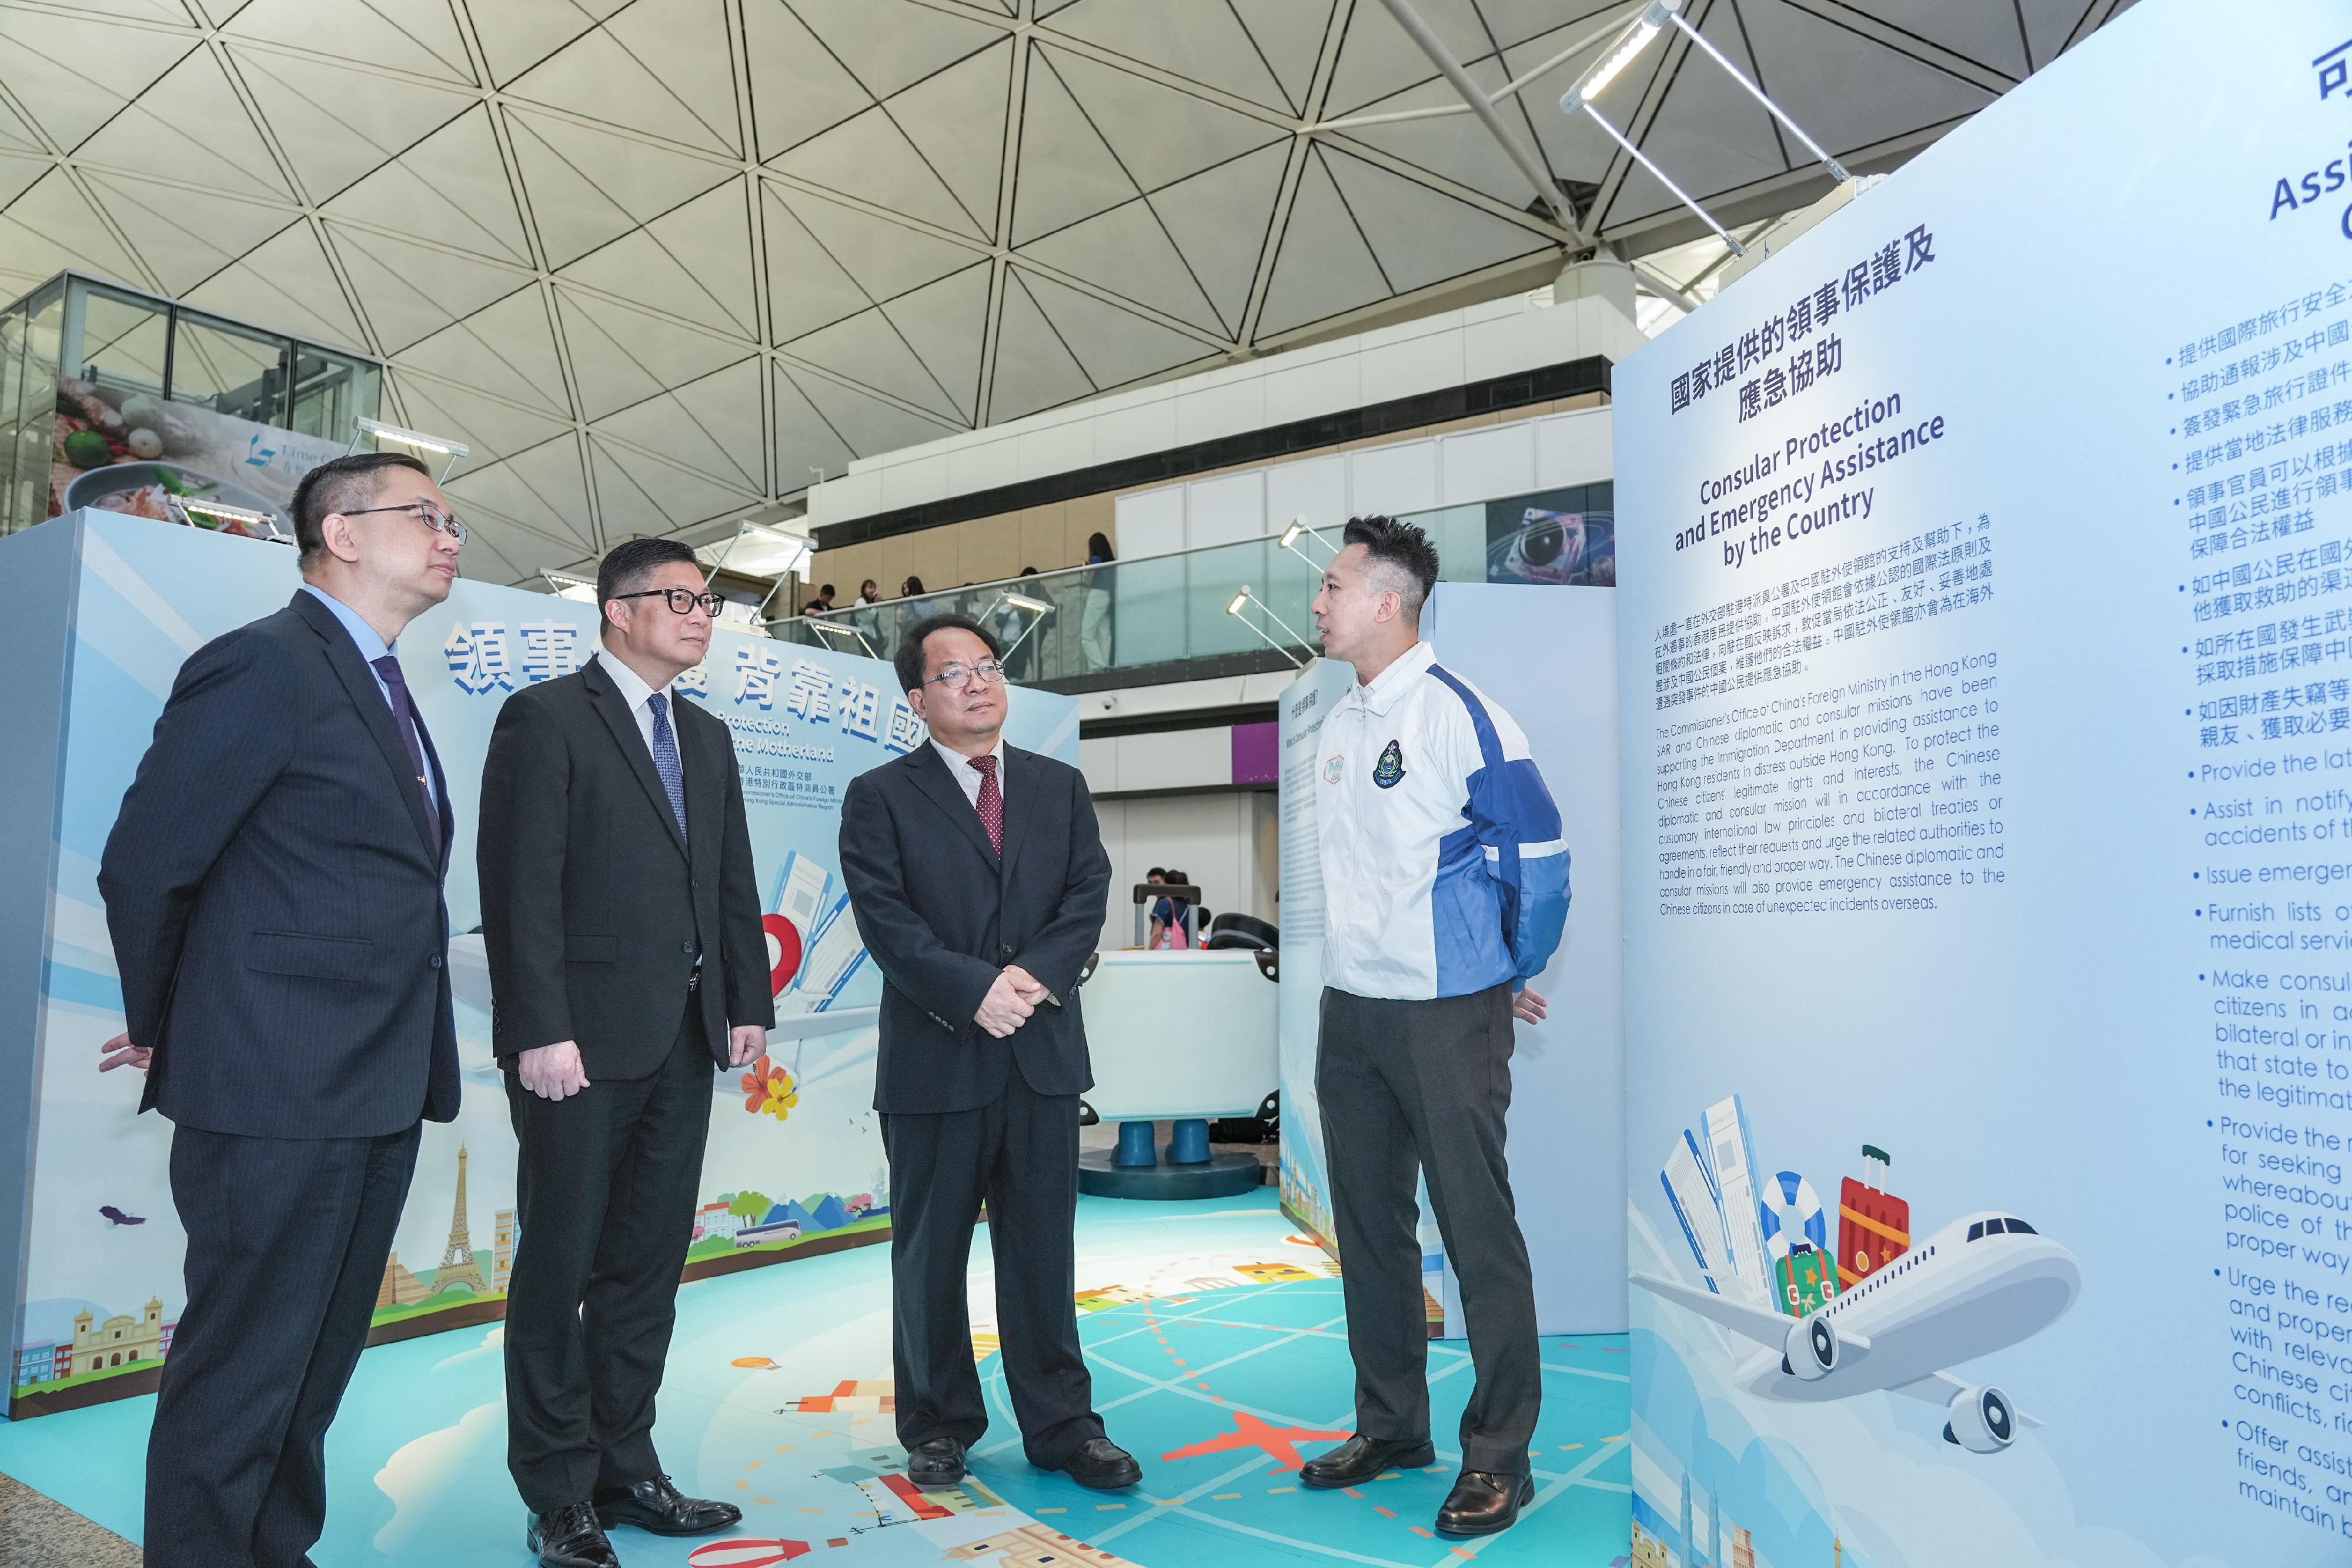 The Immigration Department and the Office of the Commissioner of the Ministry of Foreign Affairs in the Hong Kong Special Administrative Region (OCMFA) today (June 7) held the launching ceremony of the Consular Protection Month. Photo shows Deputy Commissioner of the OCMFA Mr Pan Yundong (second right); the Secretary for Security, Mr Tang Ping-keung (second left); and the Director of Immigration, Mr Benson Kwok (first left), visiting the roving exhibition on consular protection at Hong Kong International Airport after the launching ceremony.